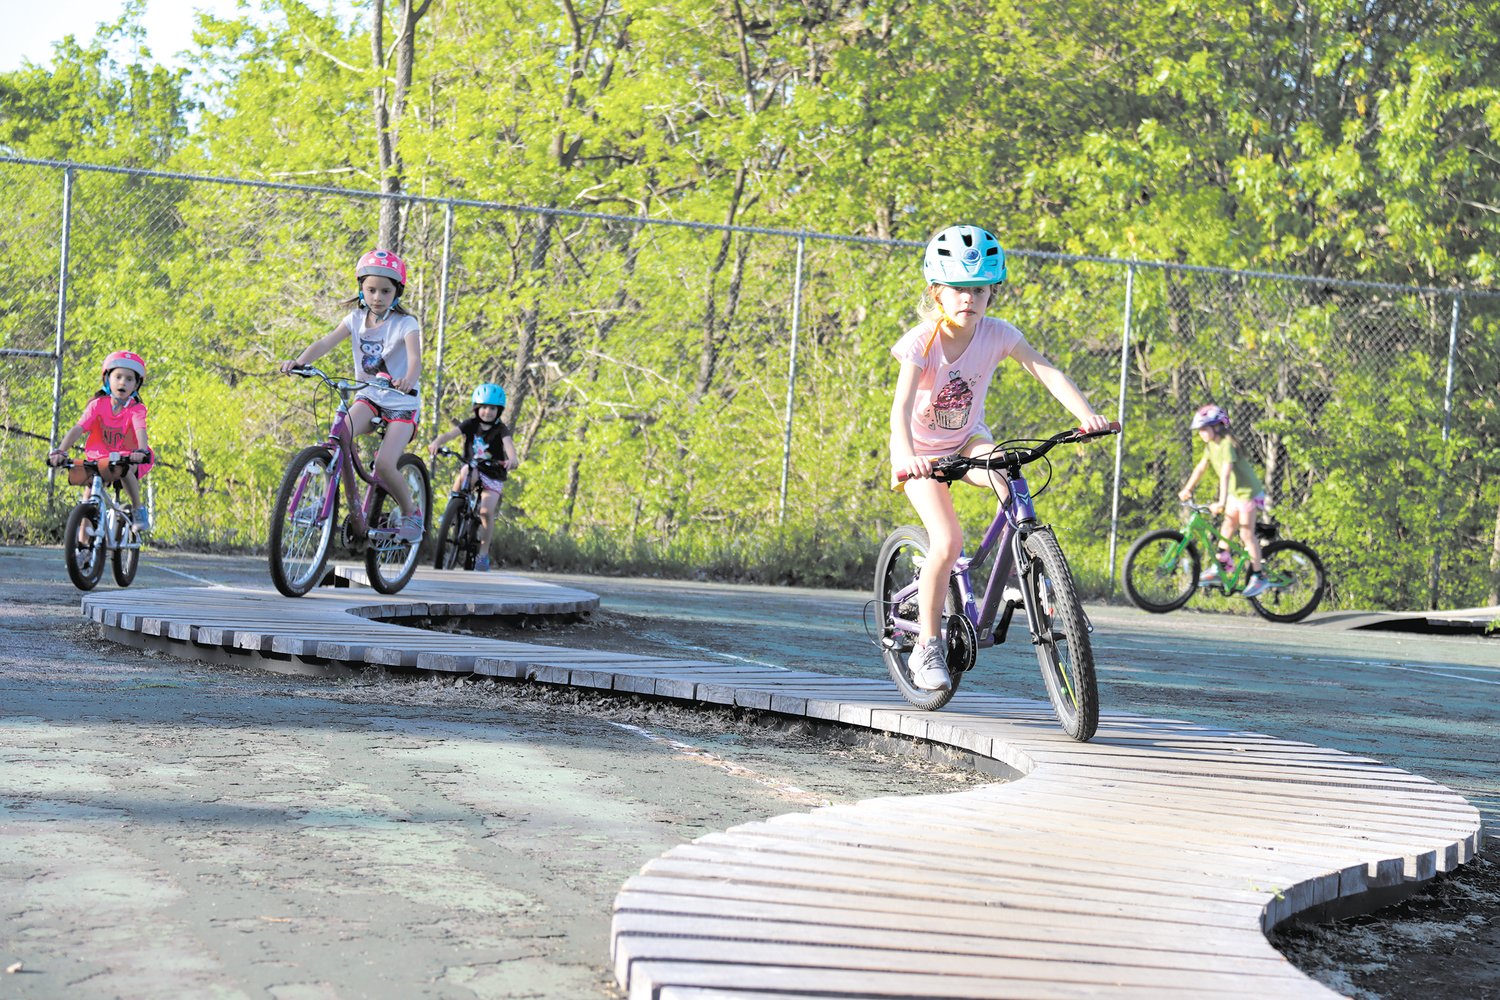 Zaylee Olson (7) leads a group of girls on the snake at the Nokomis Bike Skills Park, the first of its kind in the city. Supporters hope more like it are built.  (Photo by Tesha M. Christensen)